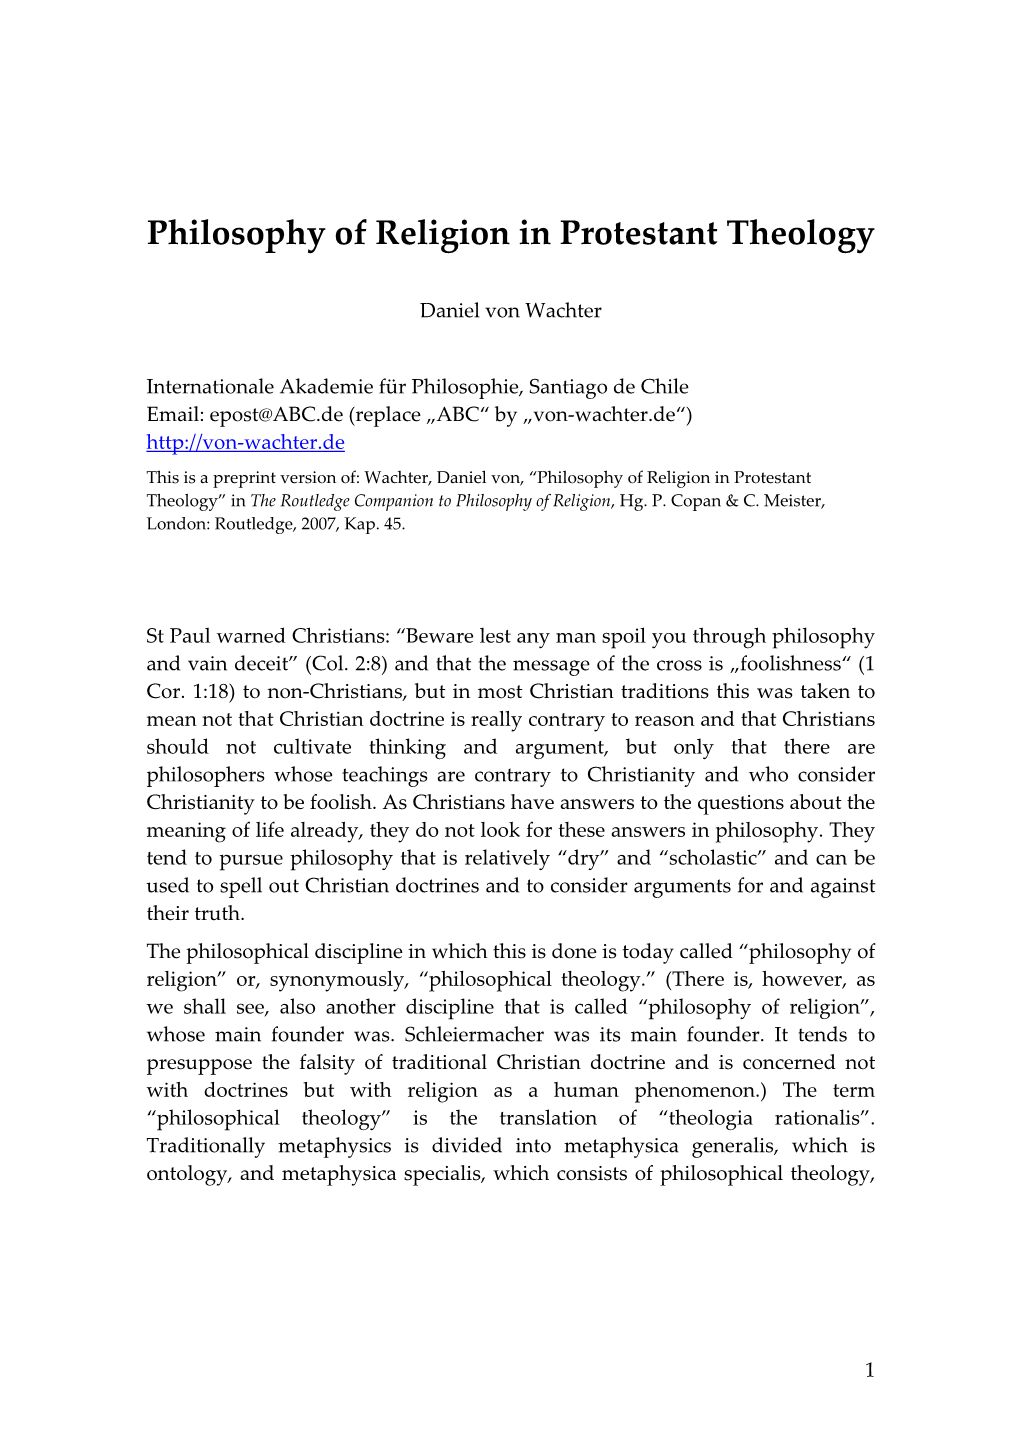 Philosophy of Religion in Protestant Theology